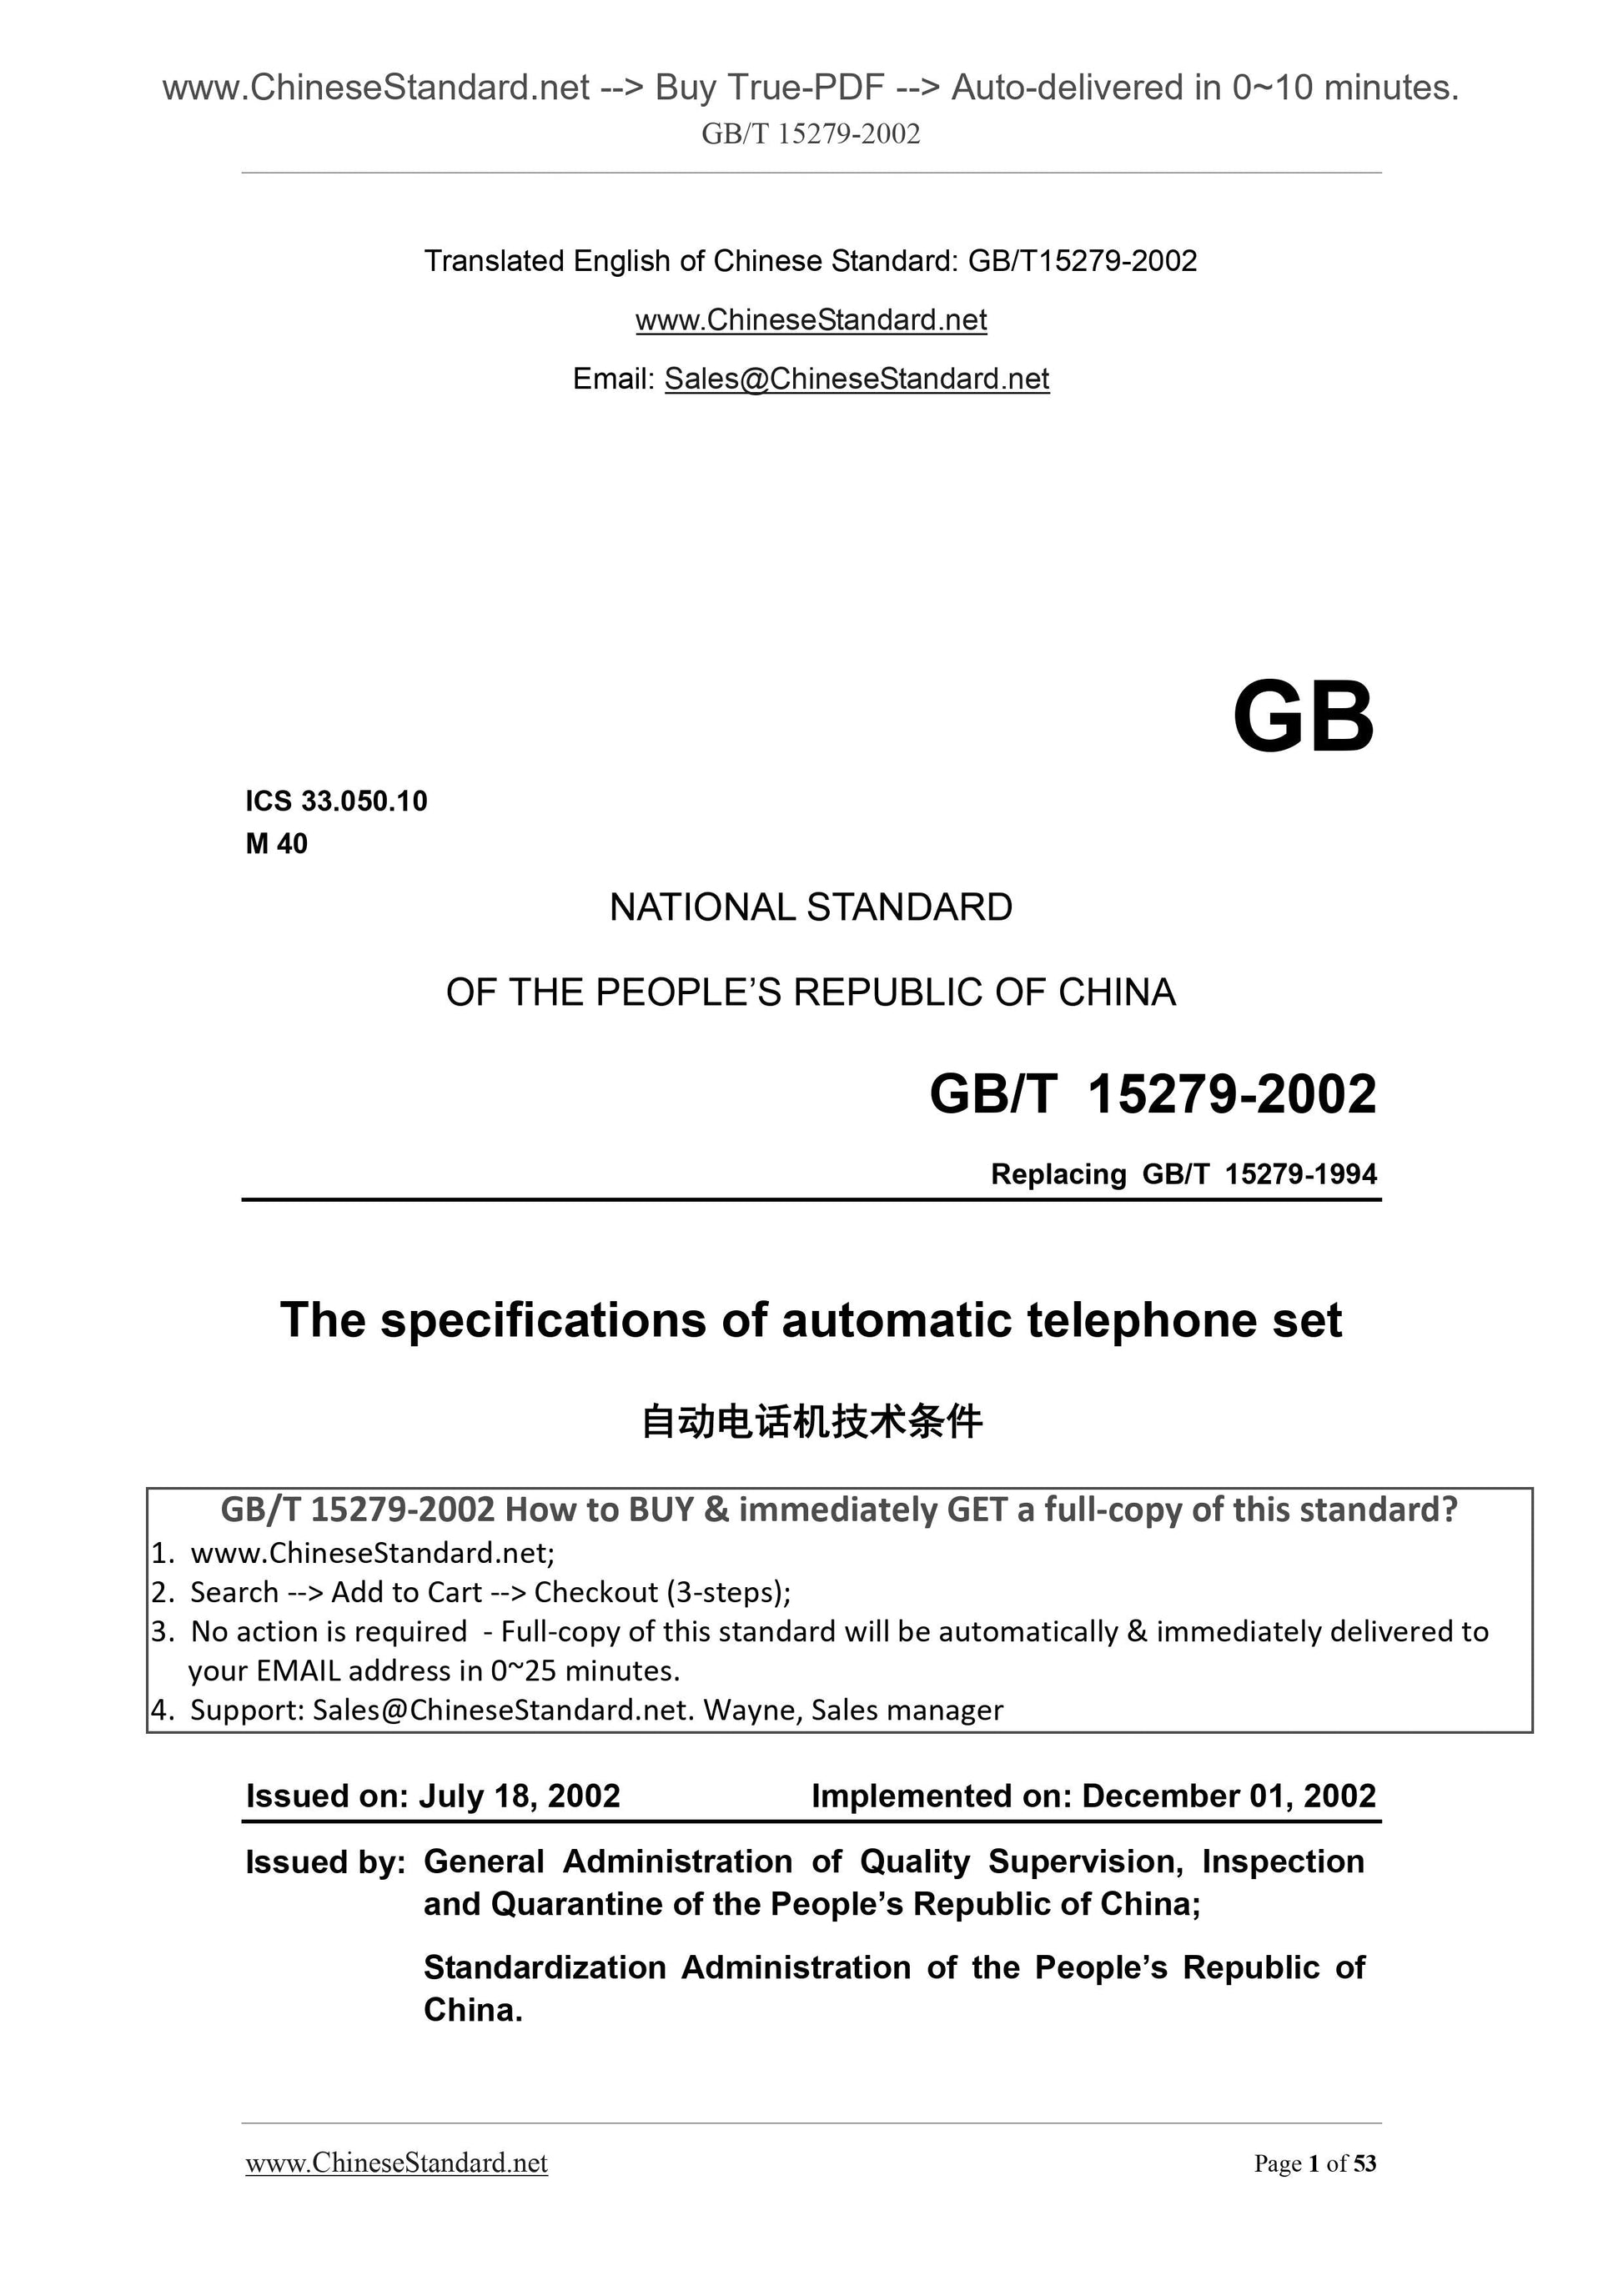 GB/T 15279-2002 Page 1